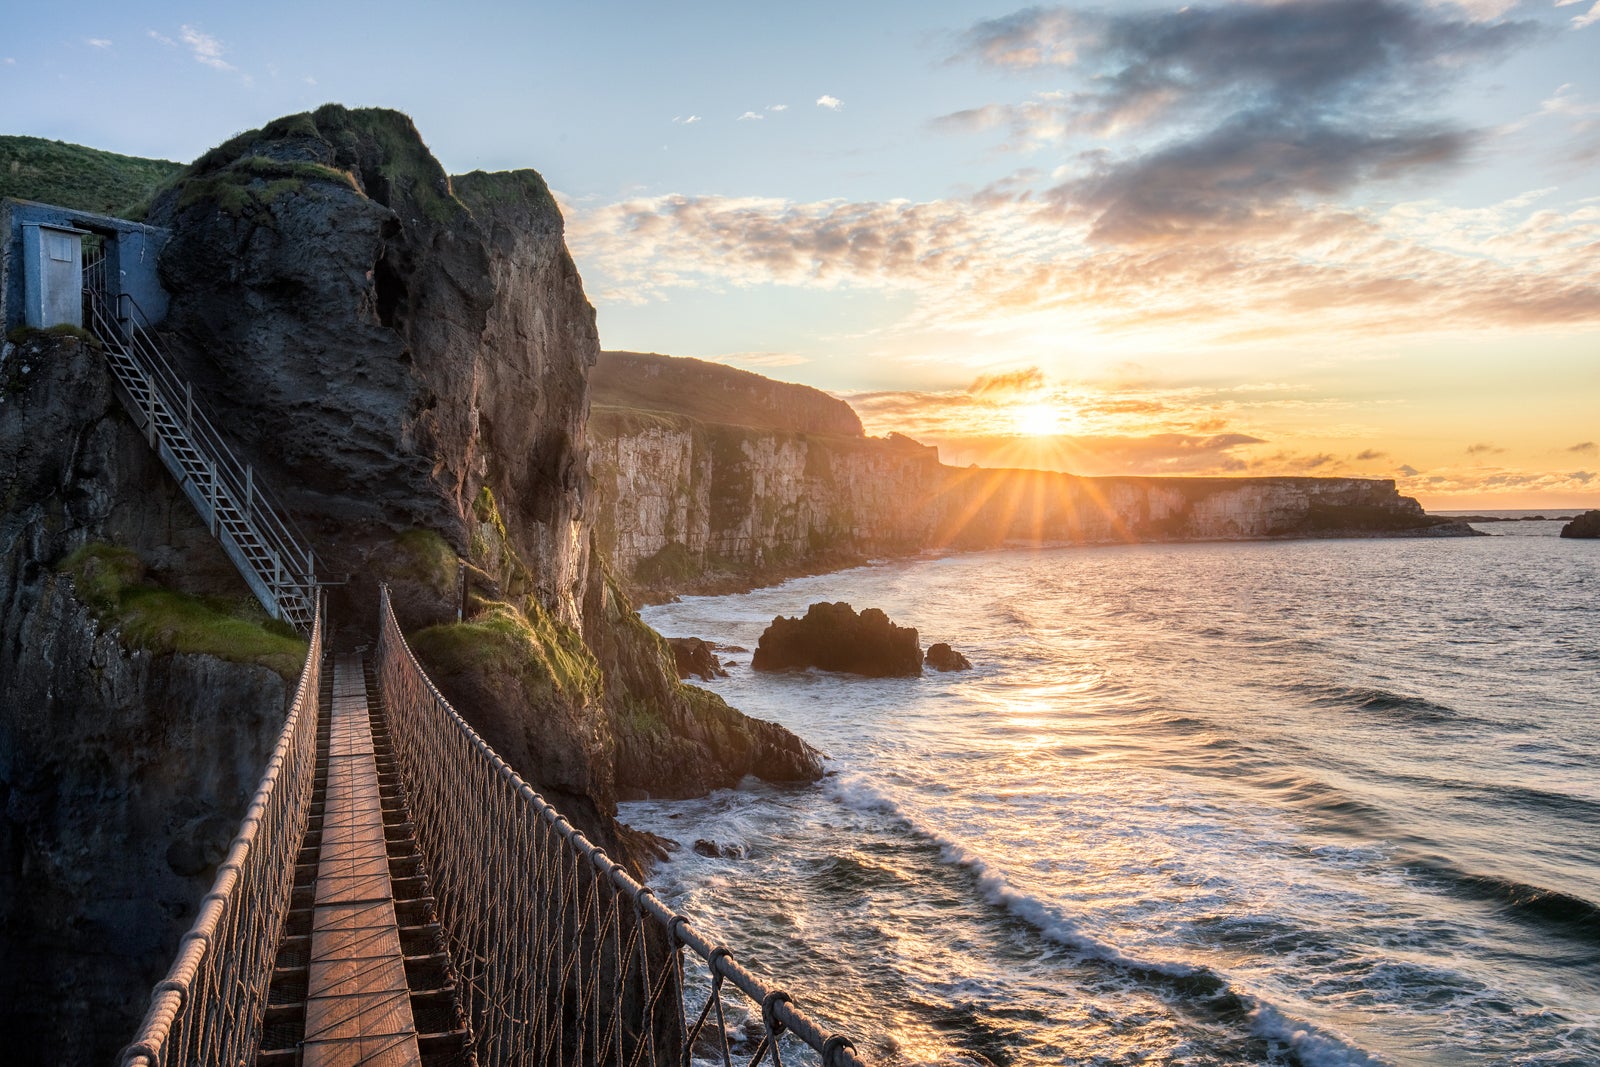 Carrick-a-Rede Rope Bridge. (Photo by James Kerwin/Getty Images)